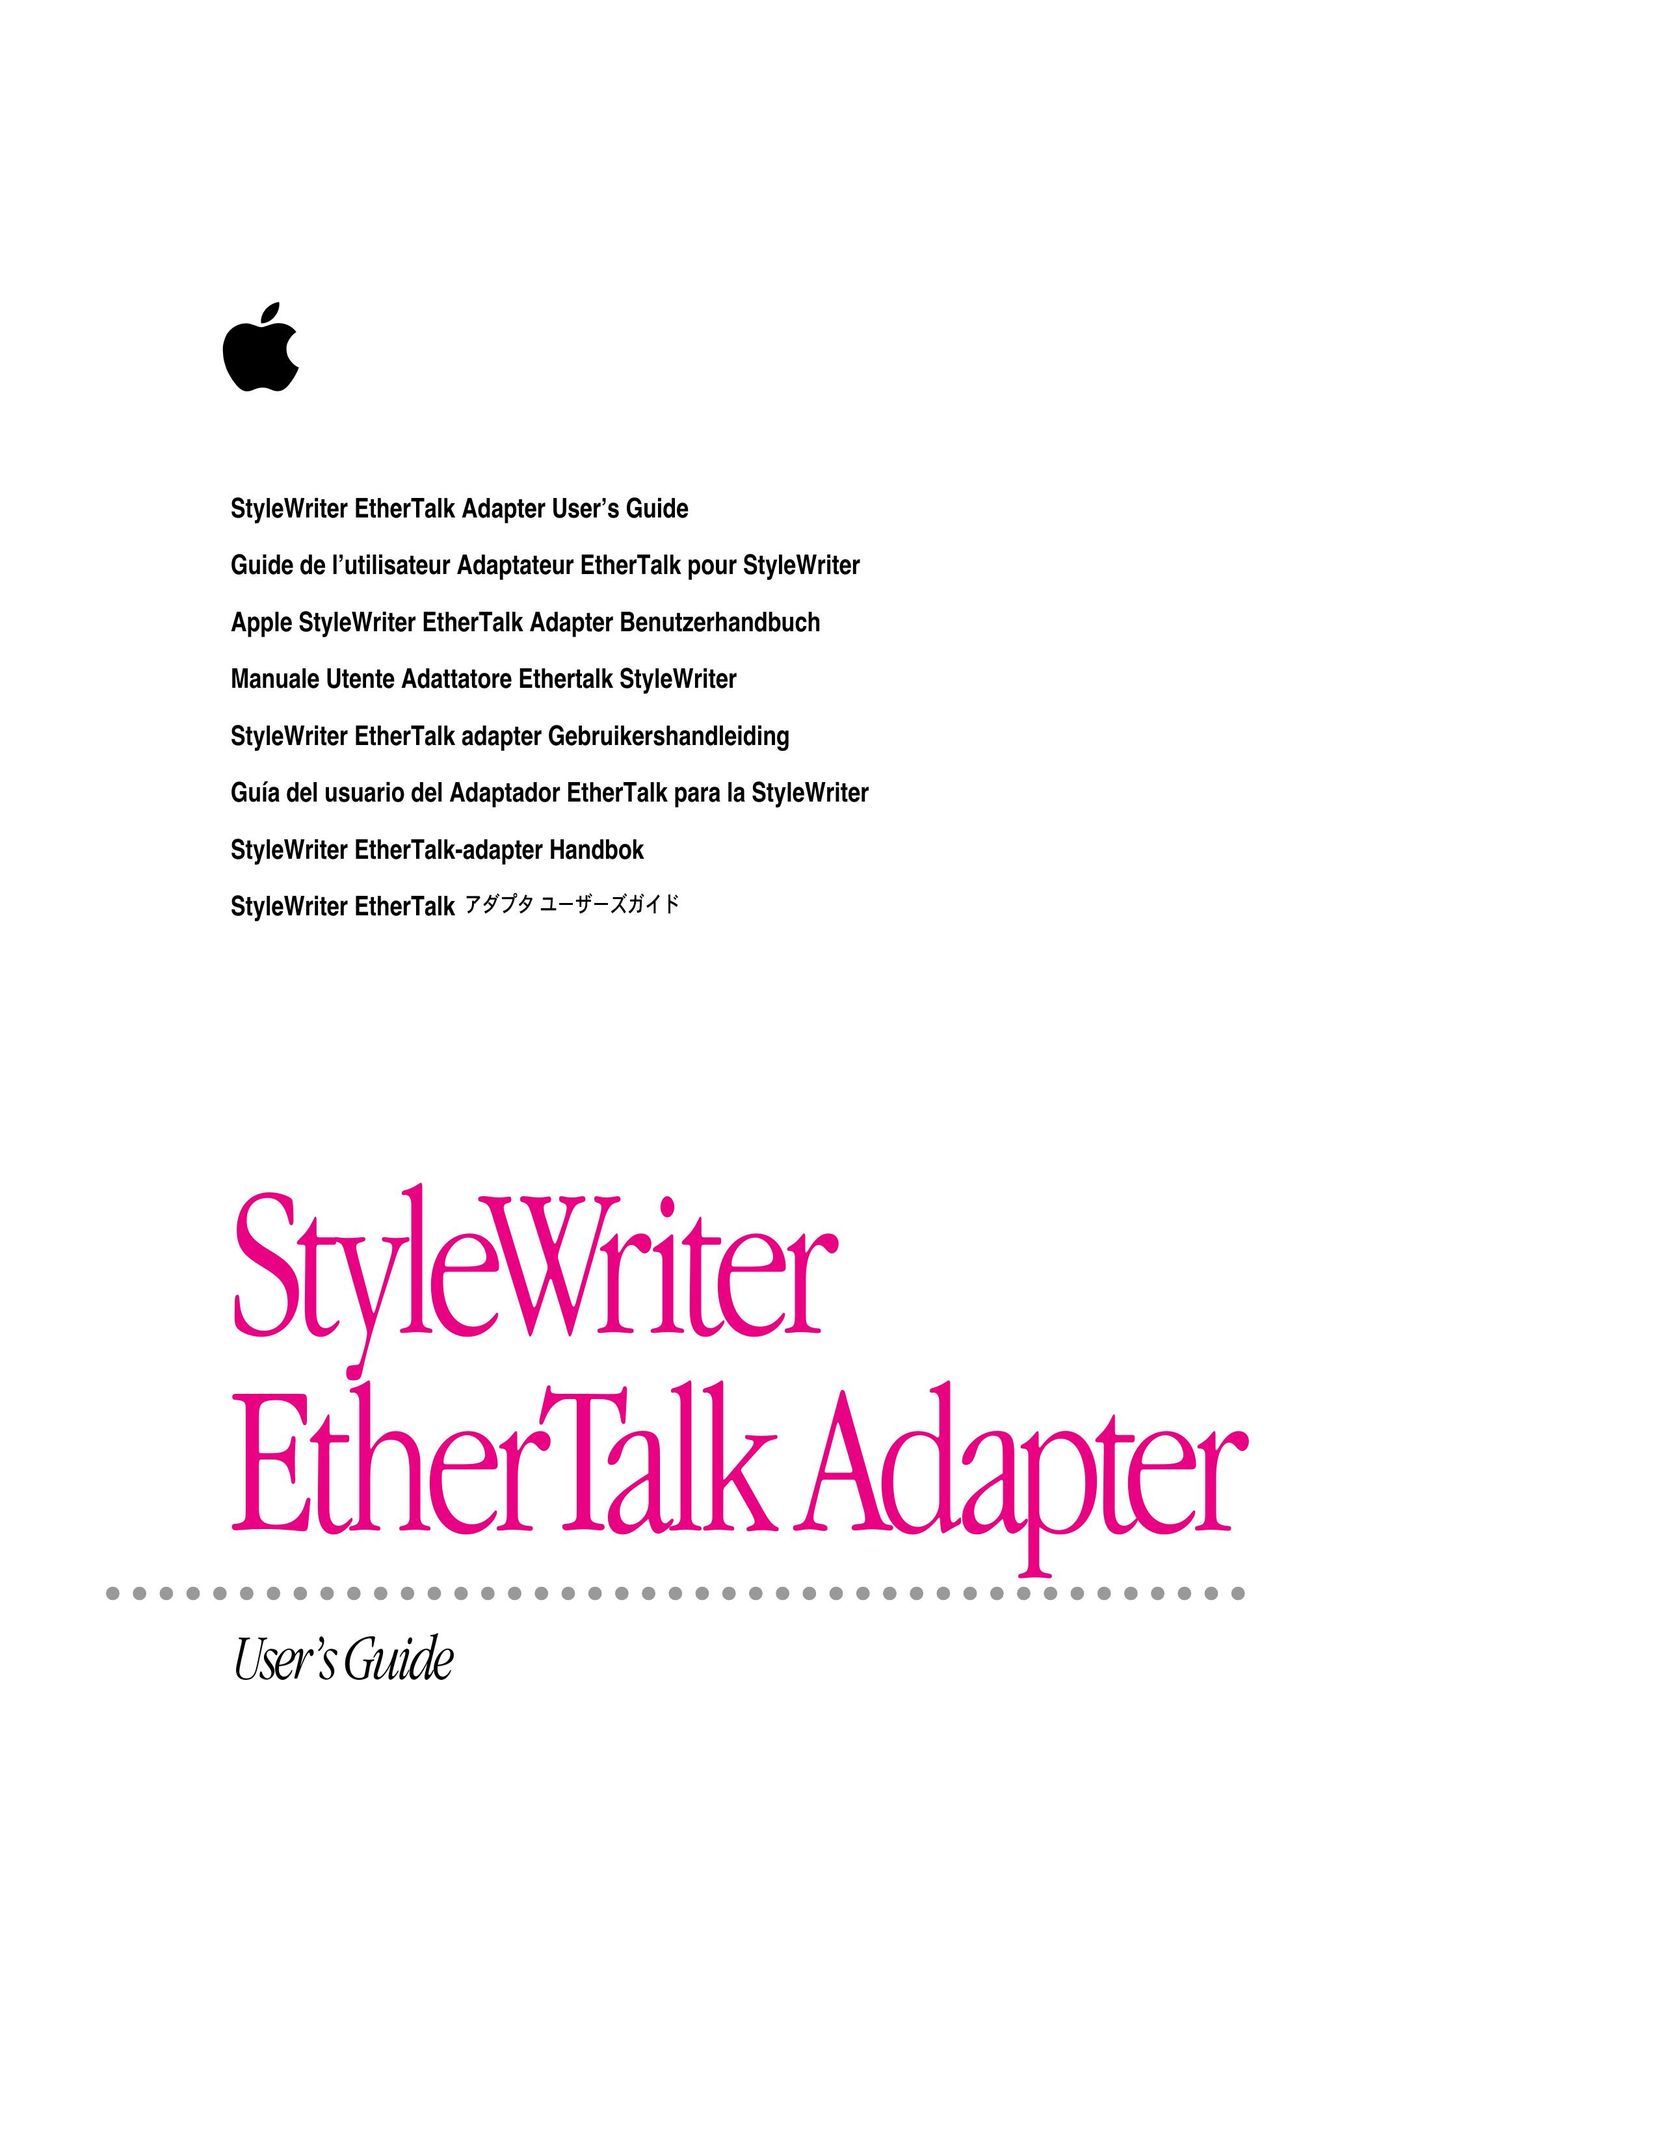 Apple EtherTalk Adapter Network Cables User Manual